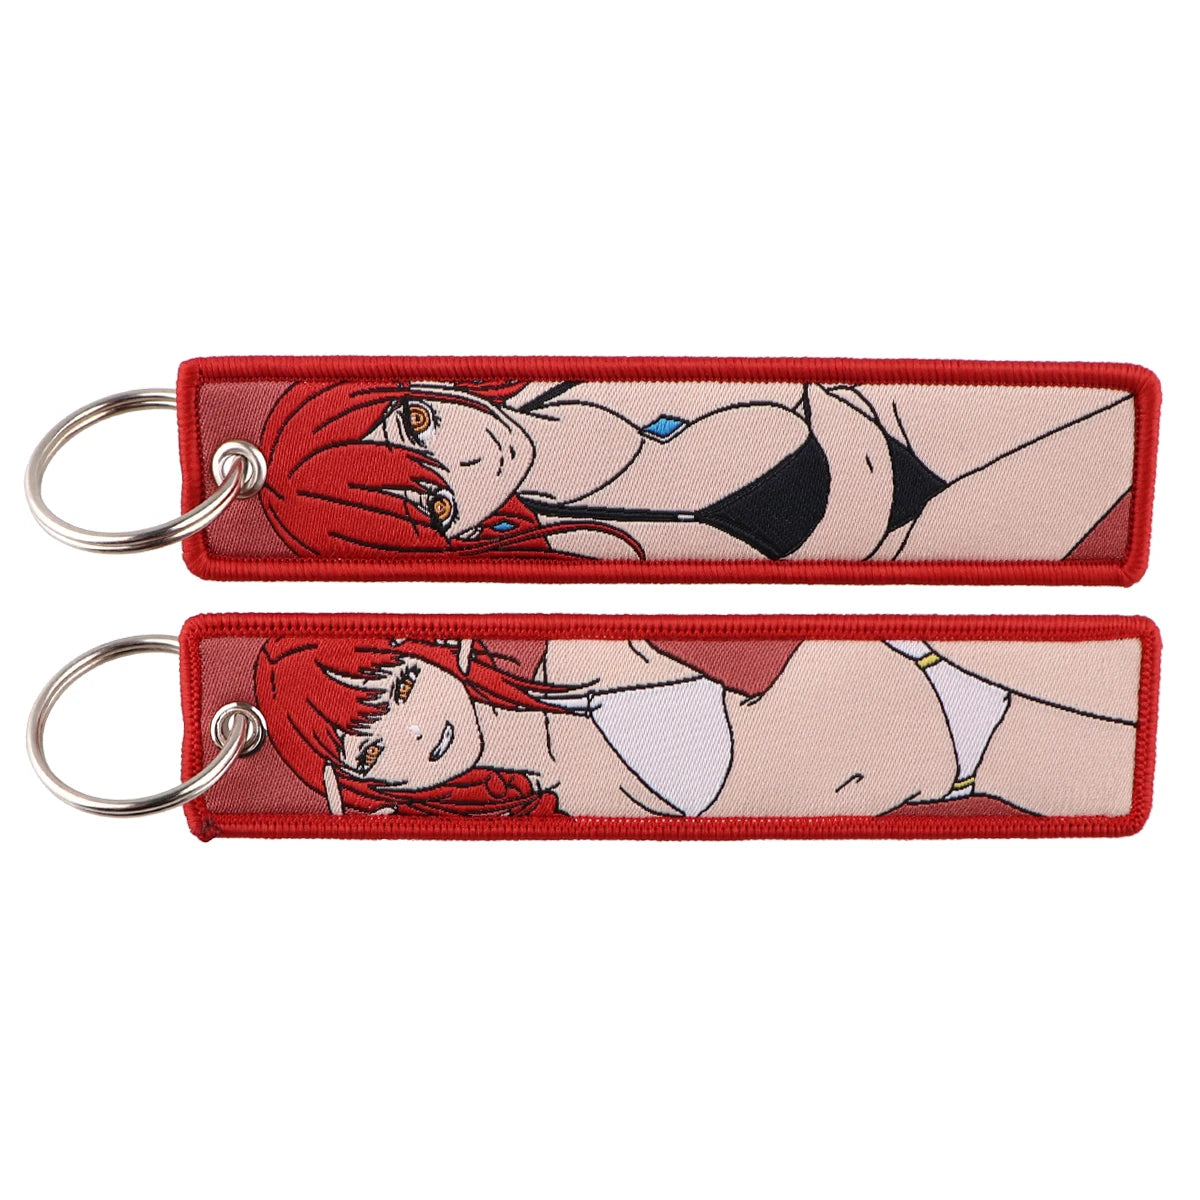 Japanese Anime Keychain Embroidery Collection 2